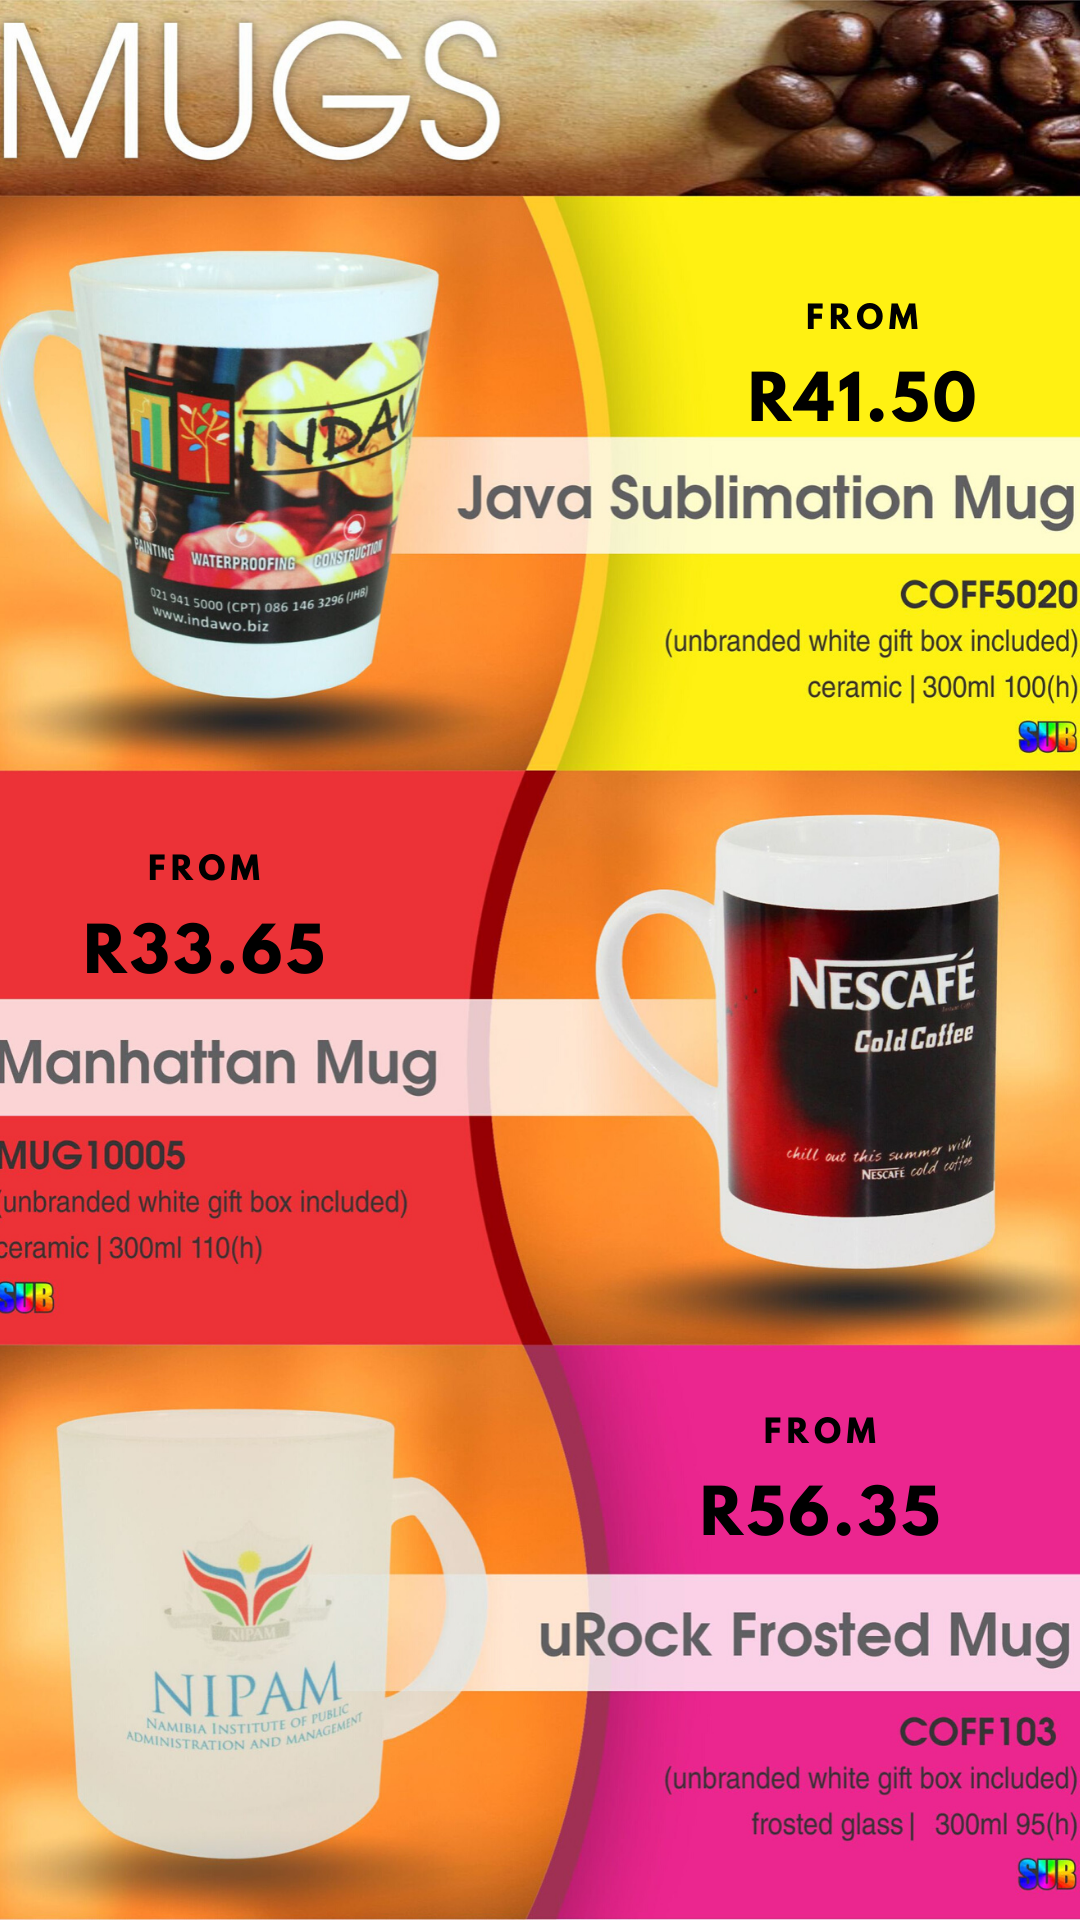 Year End Gifting Idea | Branded Sublimation Mugs